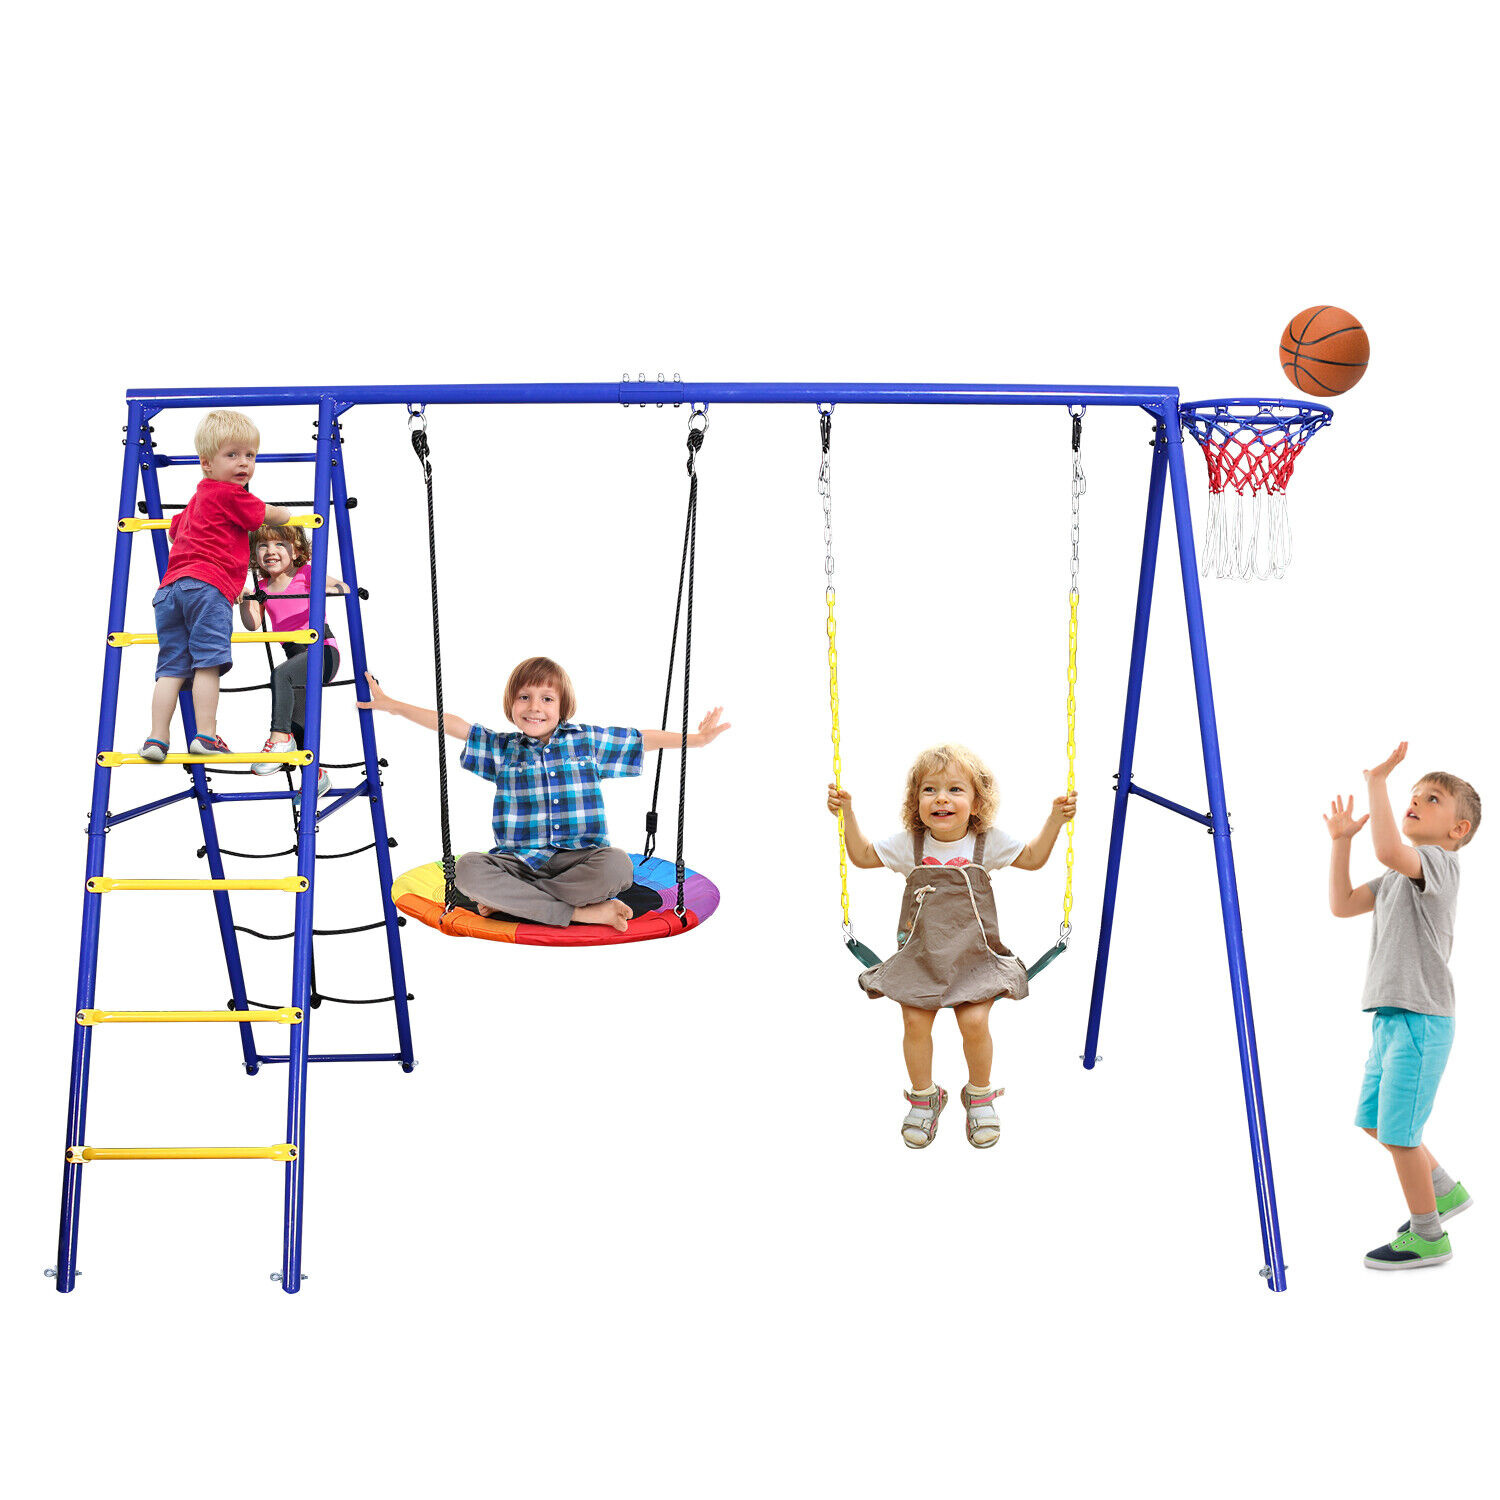 Build the Perfect Swing Set for Your Kids This Year